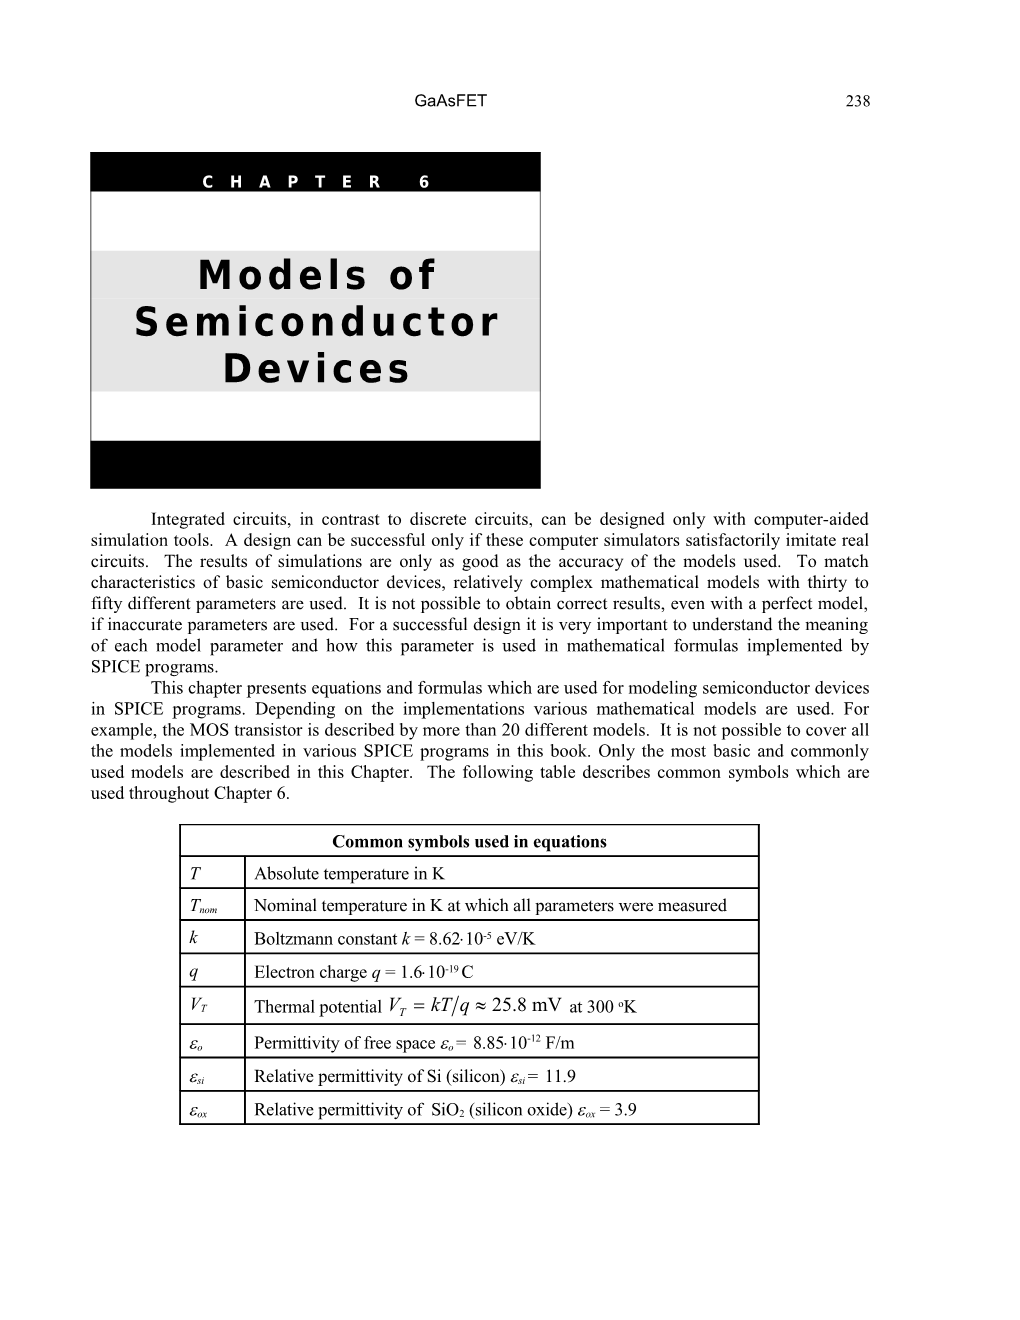 Chapter 6 Models of Semiconductor Devices